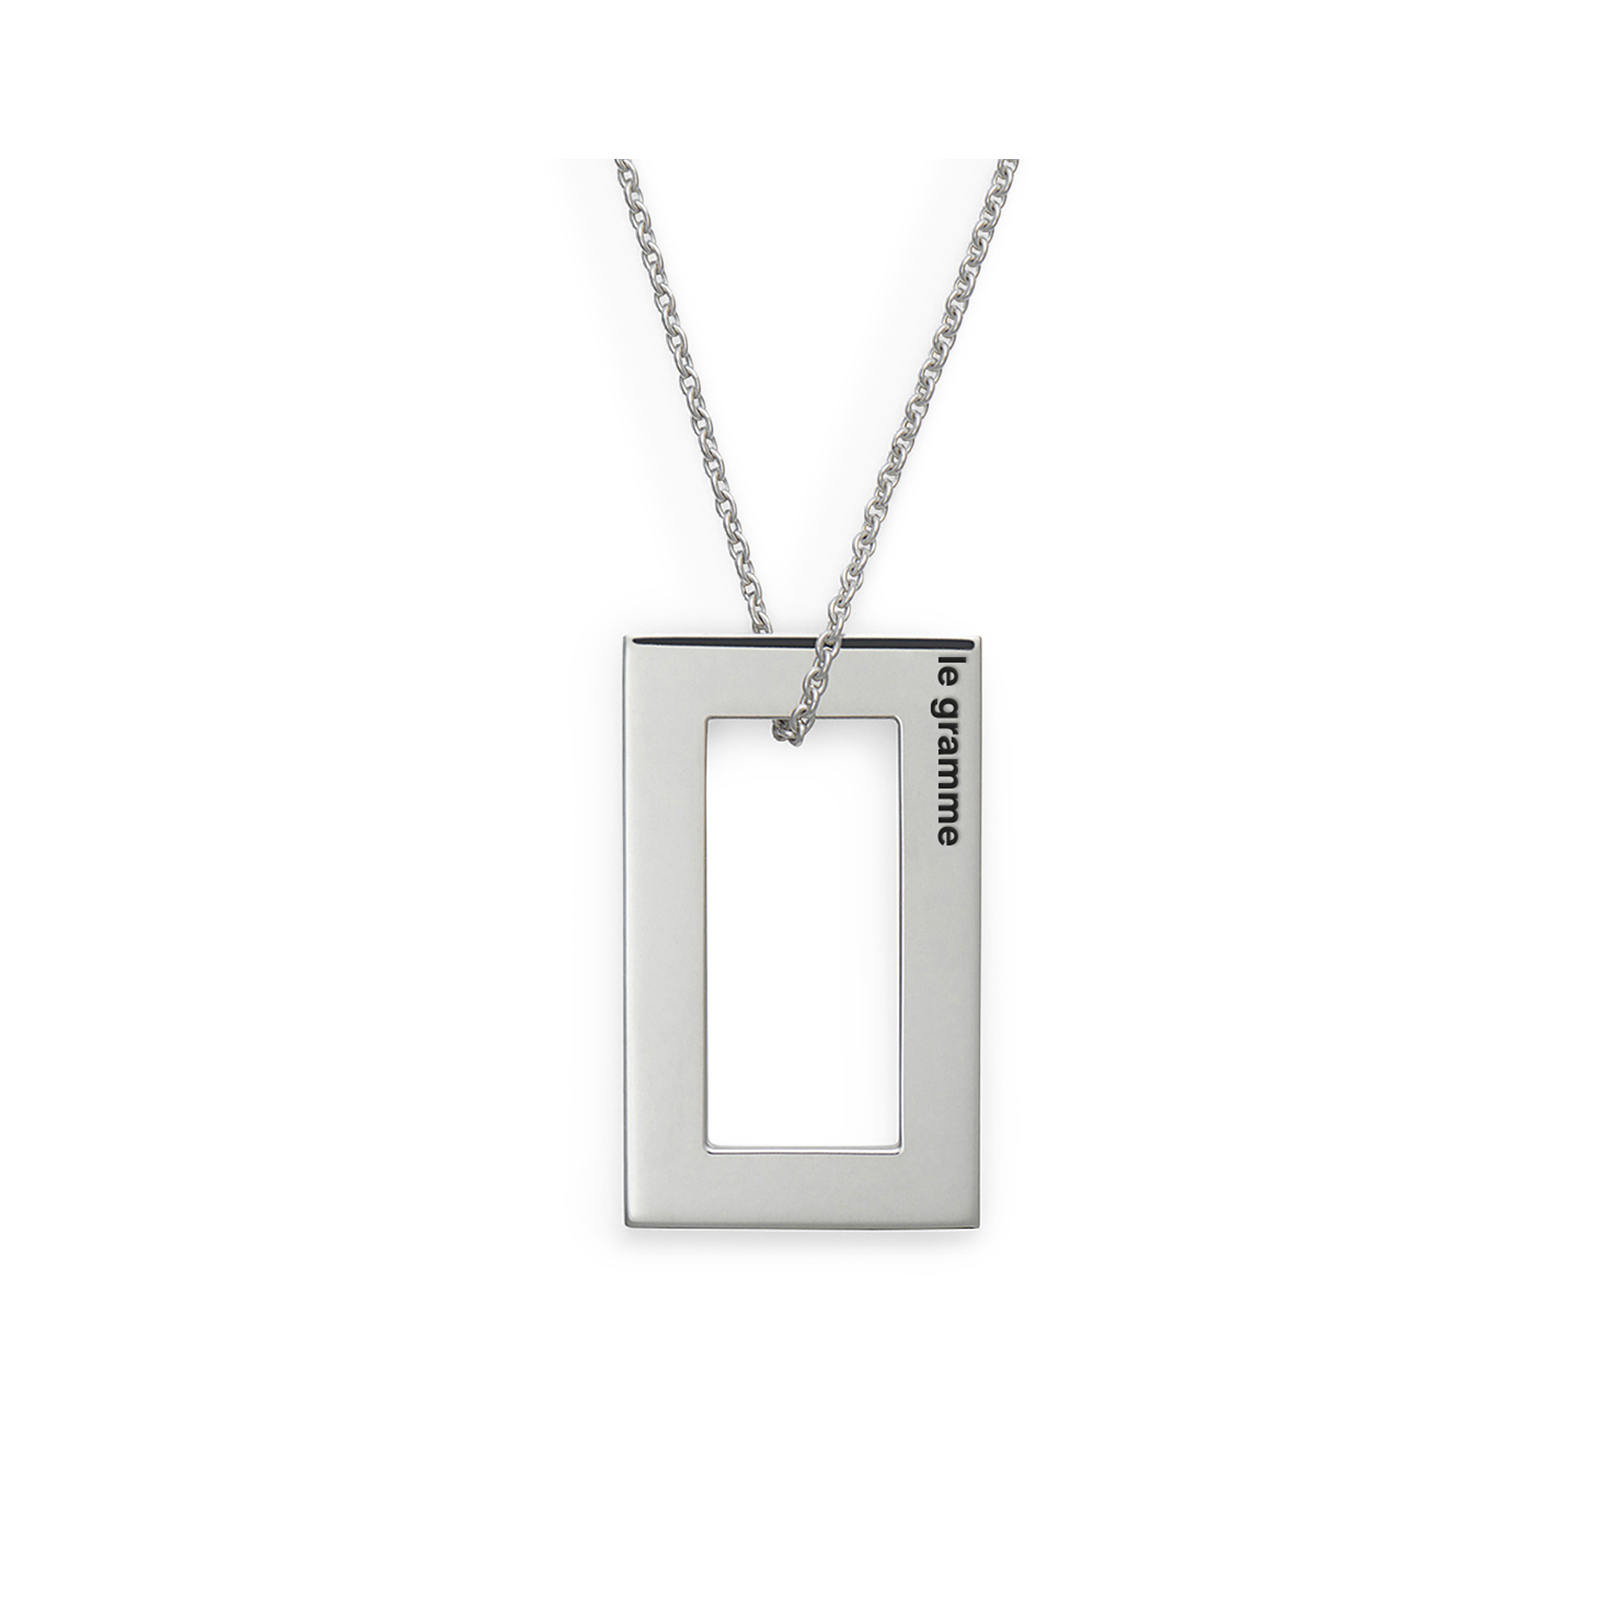 3.4g rectangle pendant with a chain